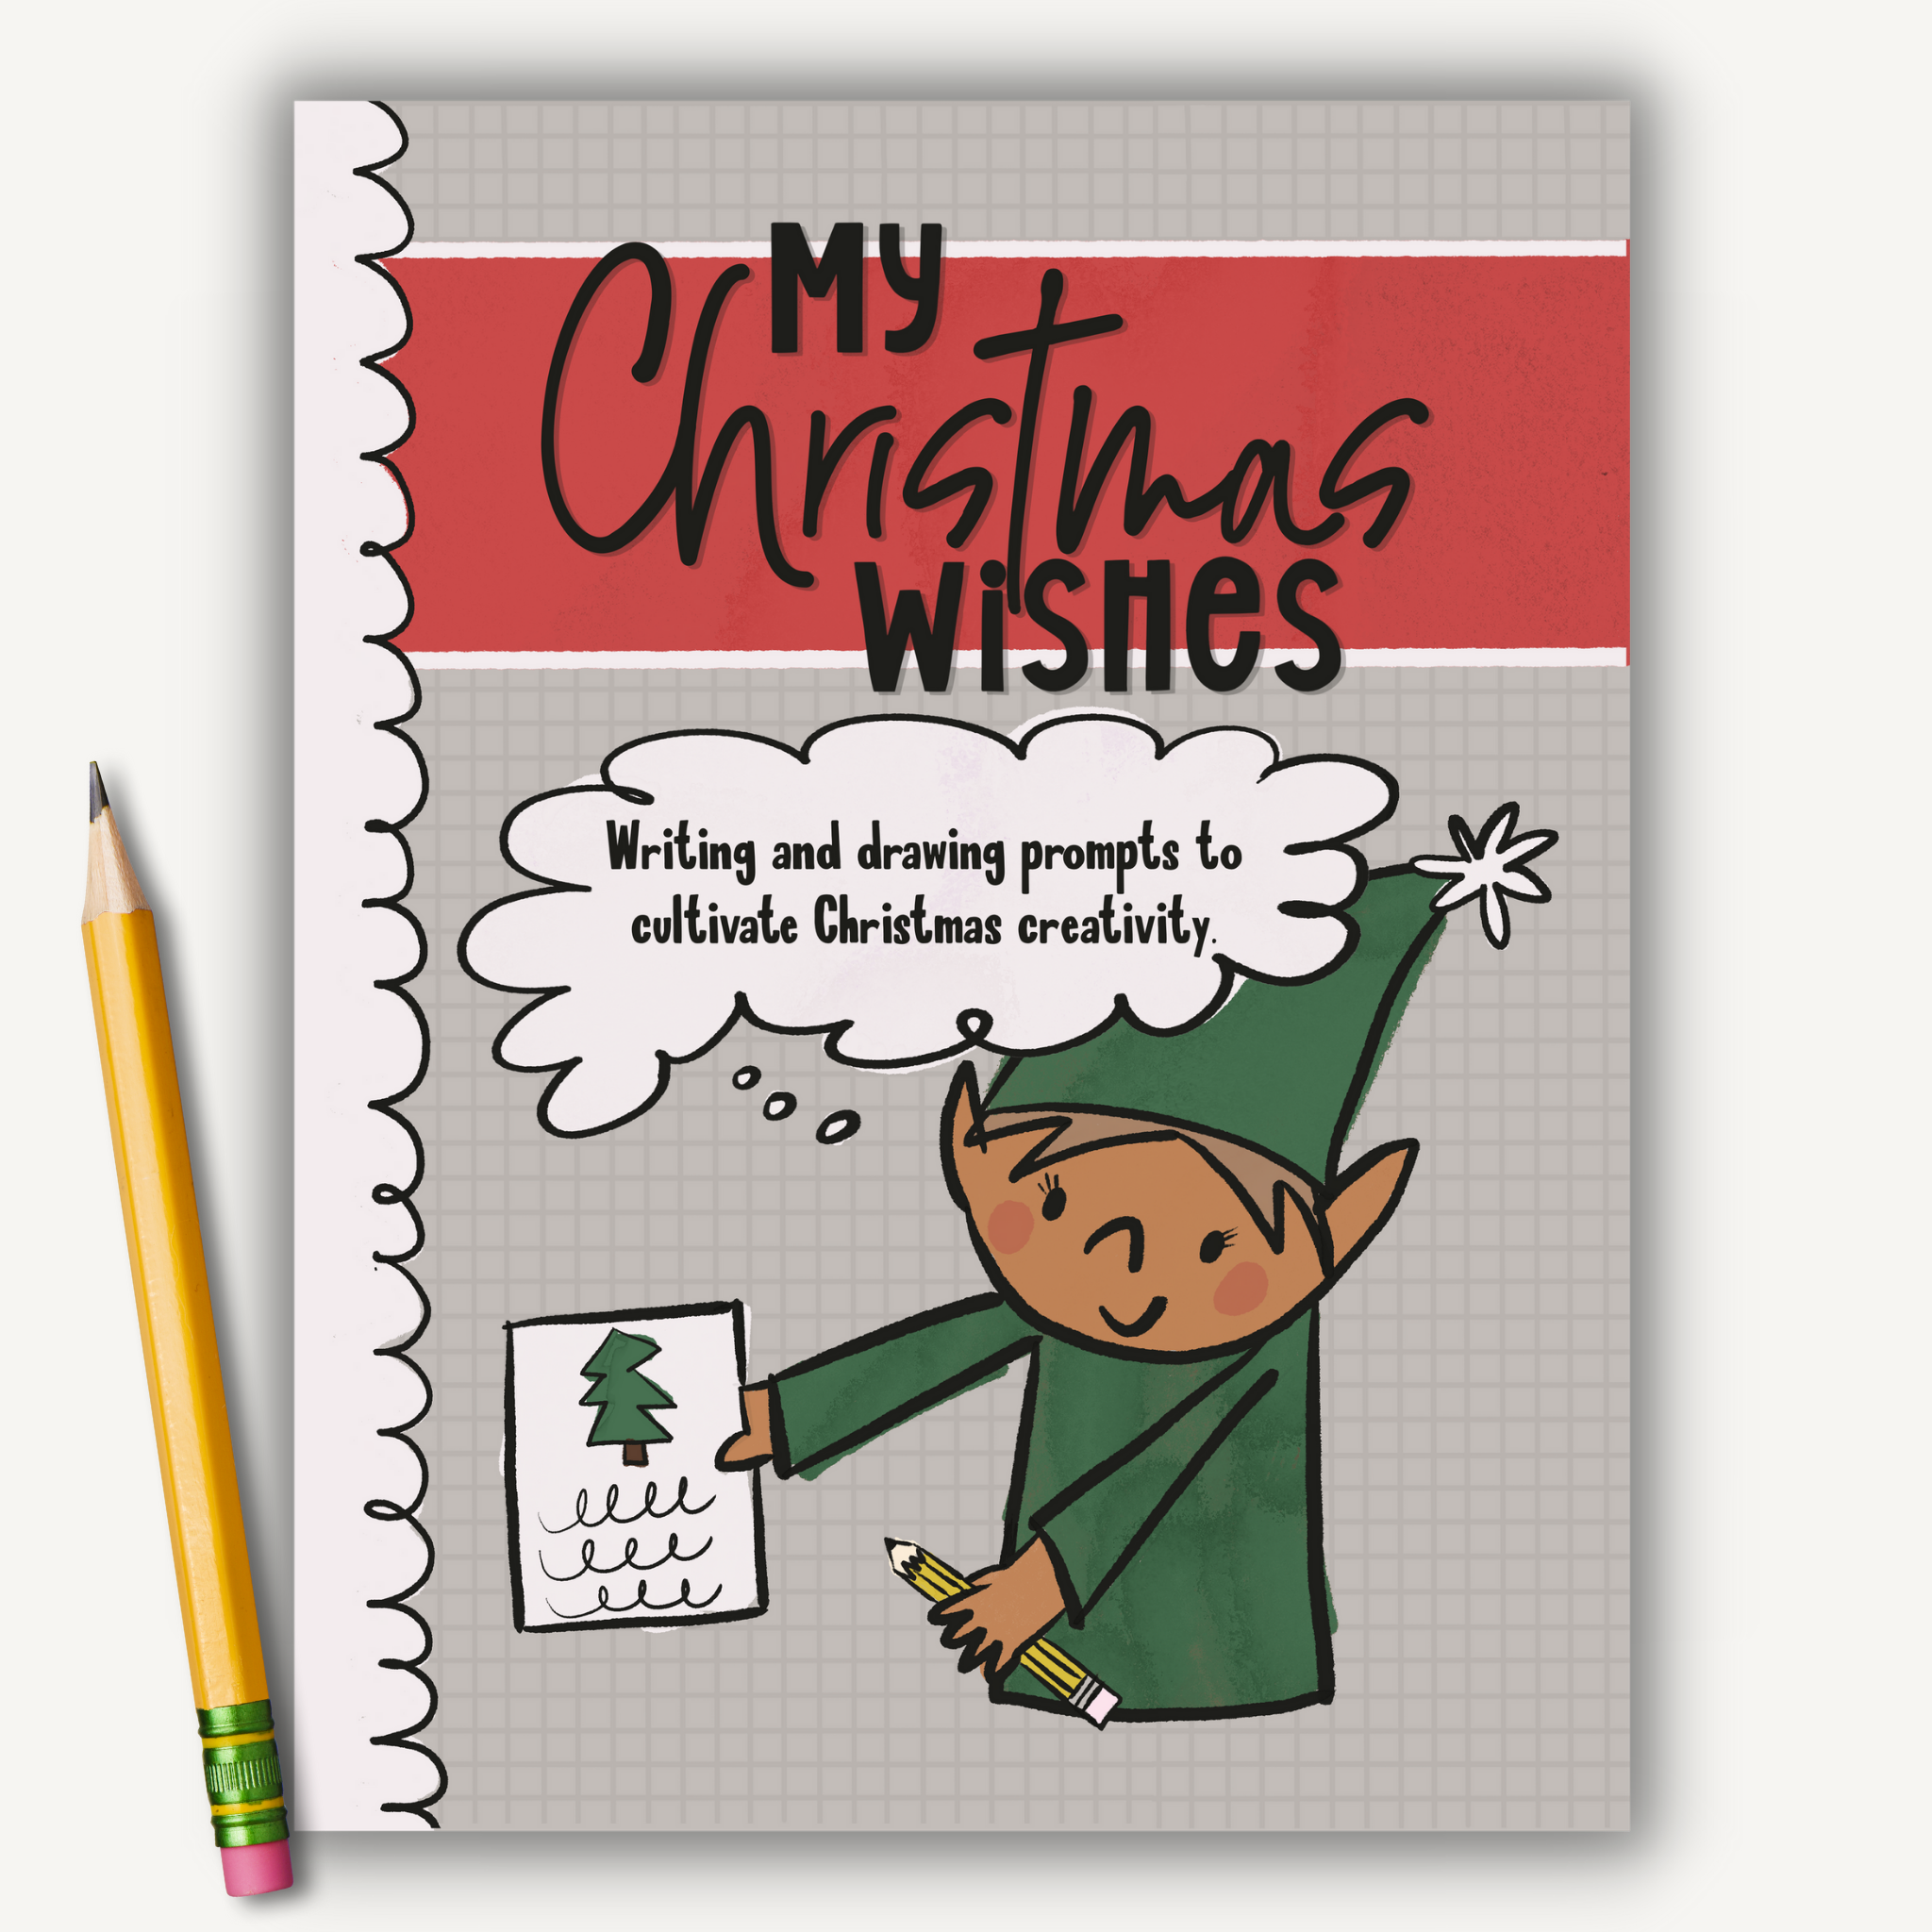 My Christmas Wishes is self published through Kindle Direct Publishing and Amazon KDP inspiring Christmas creativity with writing and drawing prompts.